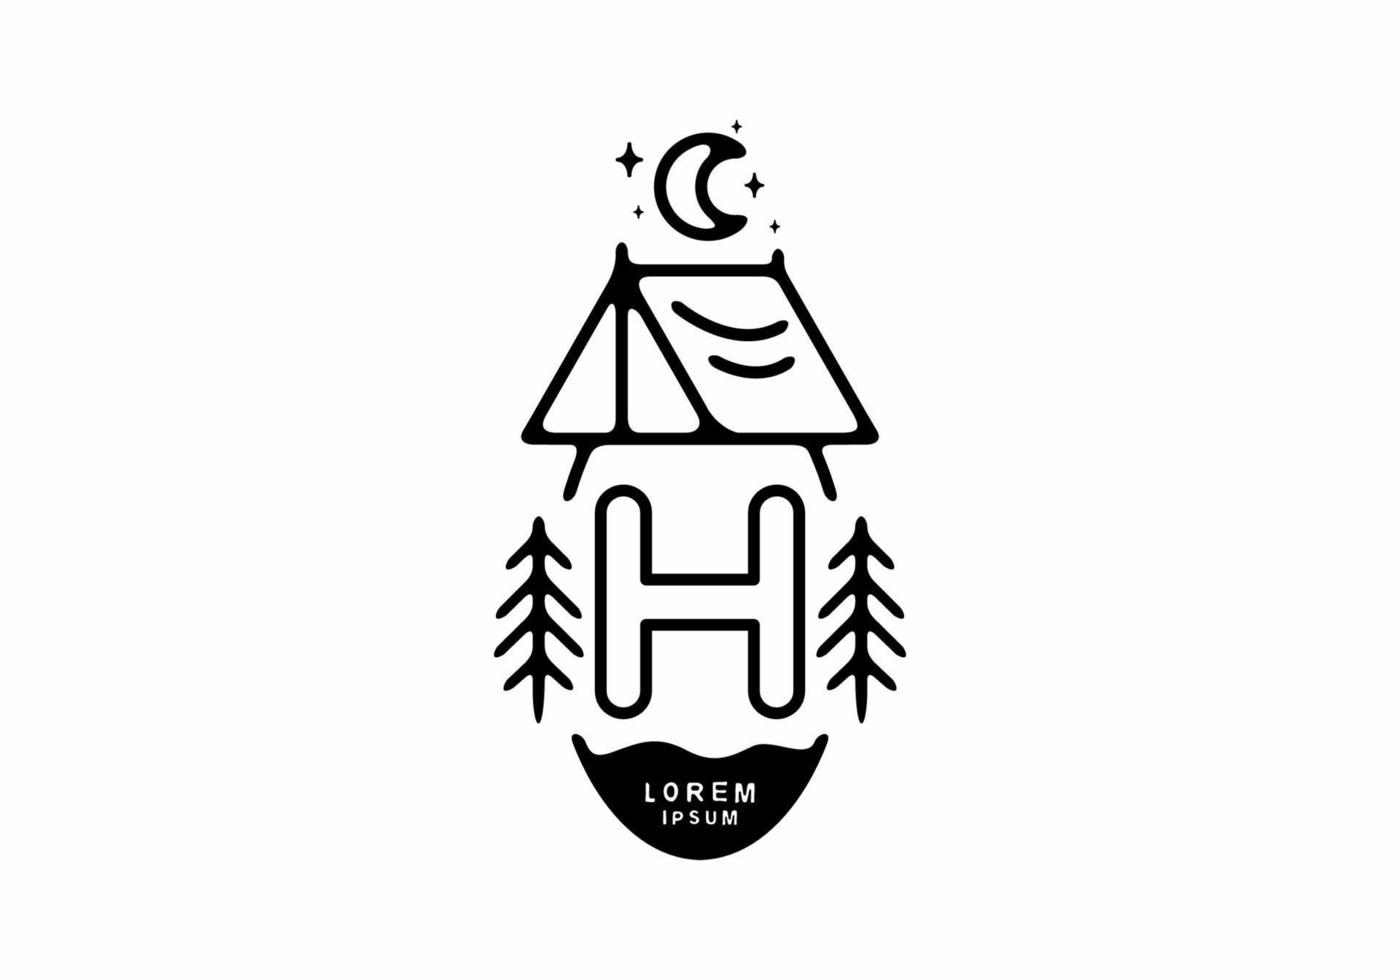 Black line art illustration of camping tent badge with H letter vector